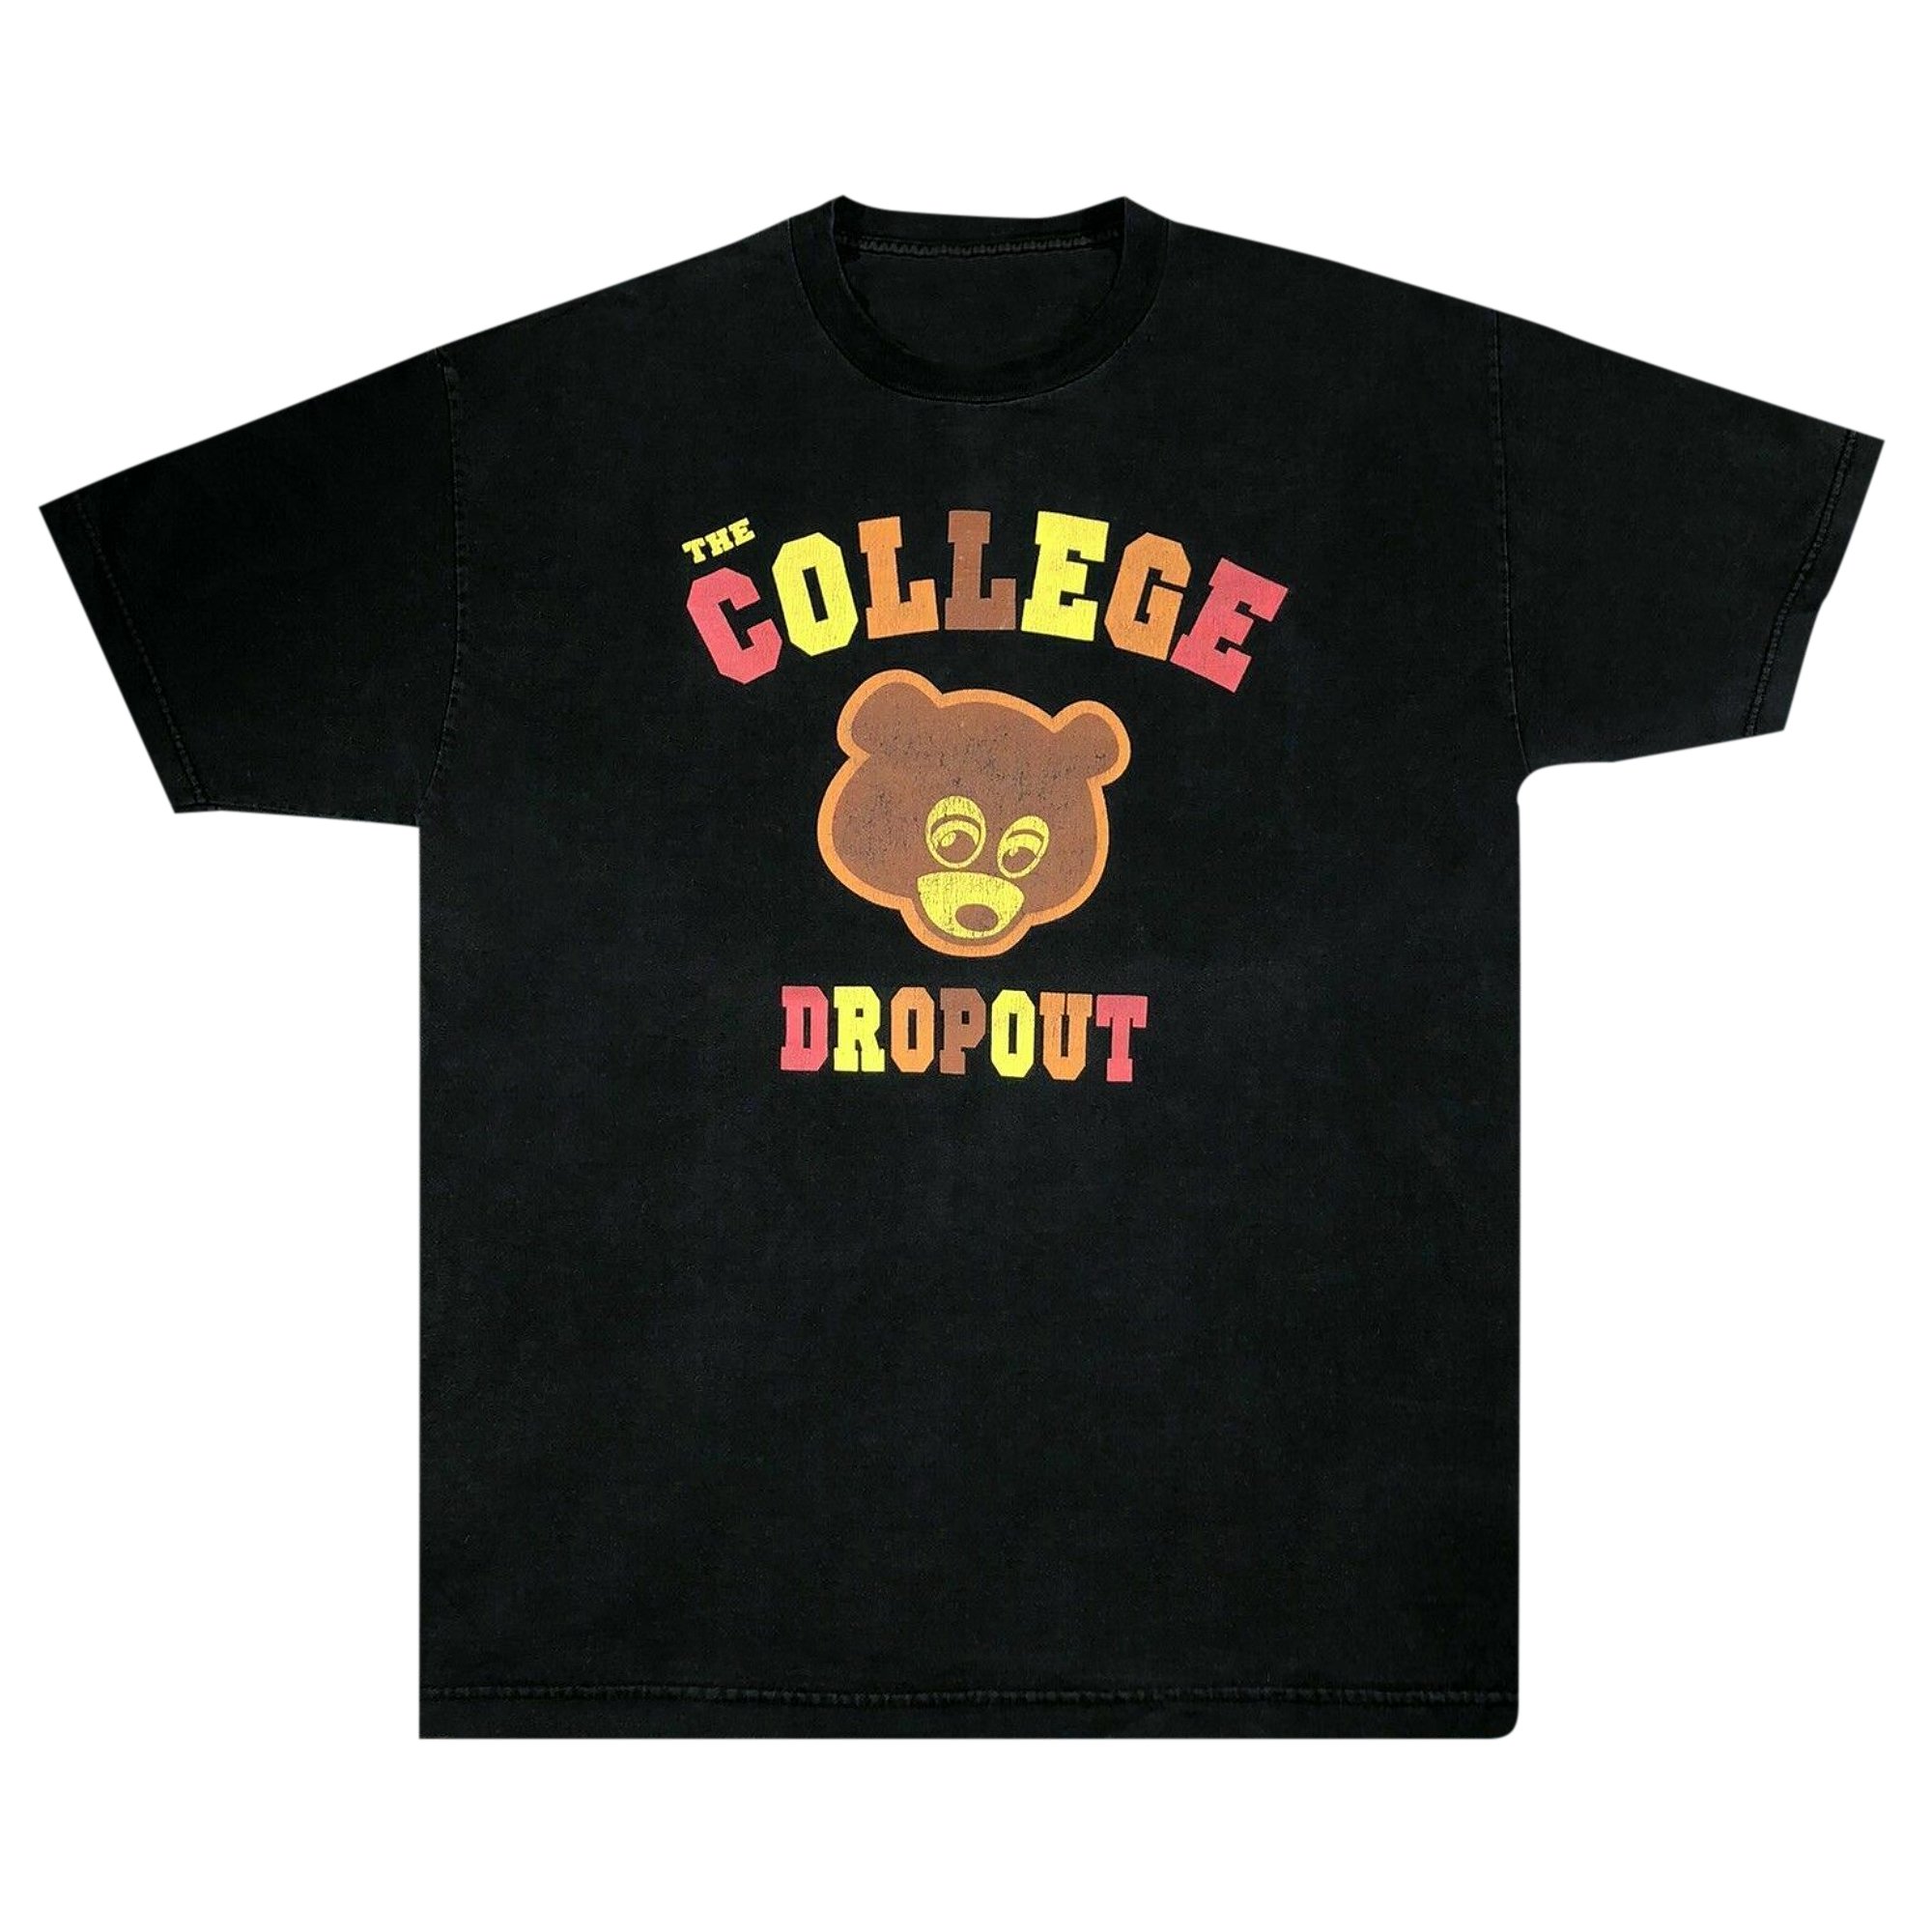 Kanye West THE COLLEGE DROPOUT Tシャツ - Tシャツ/カットソー(半袖 ...